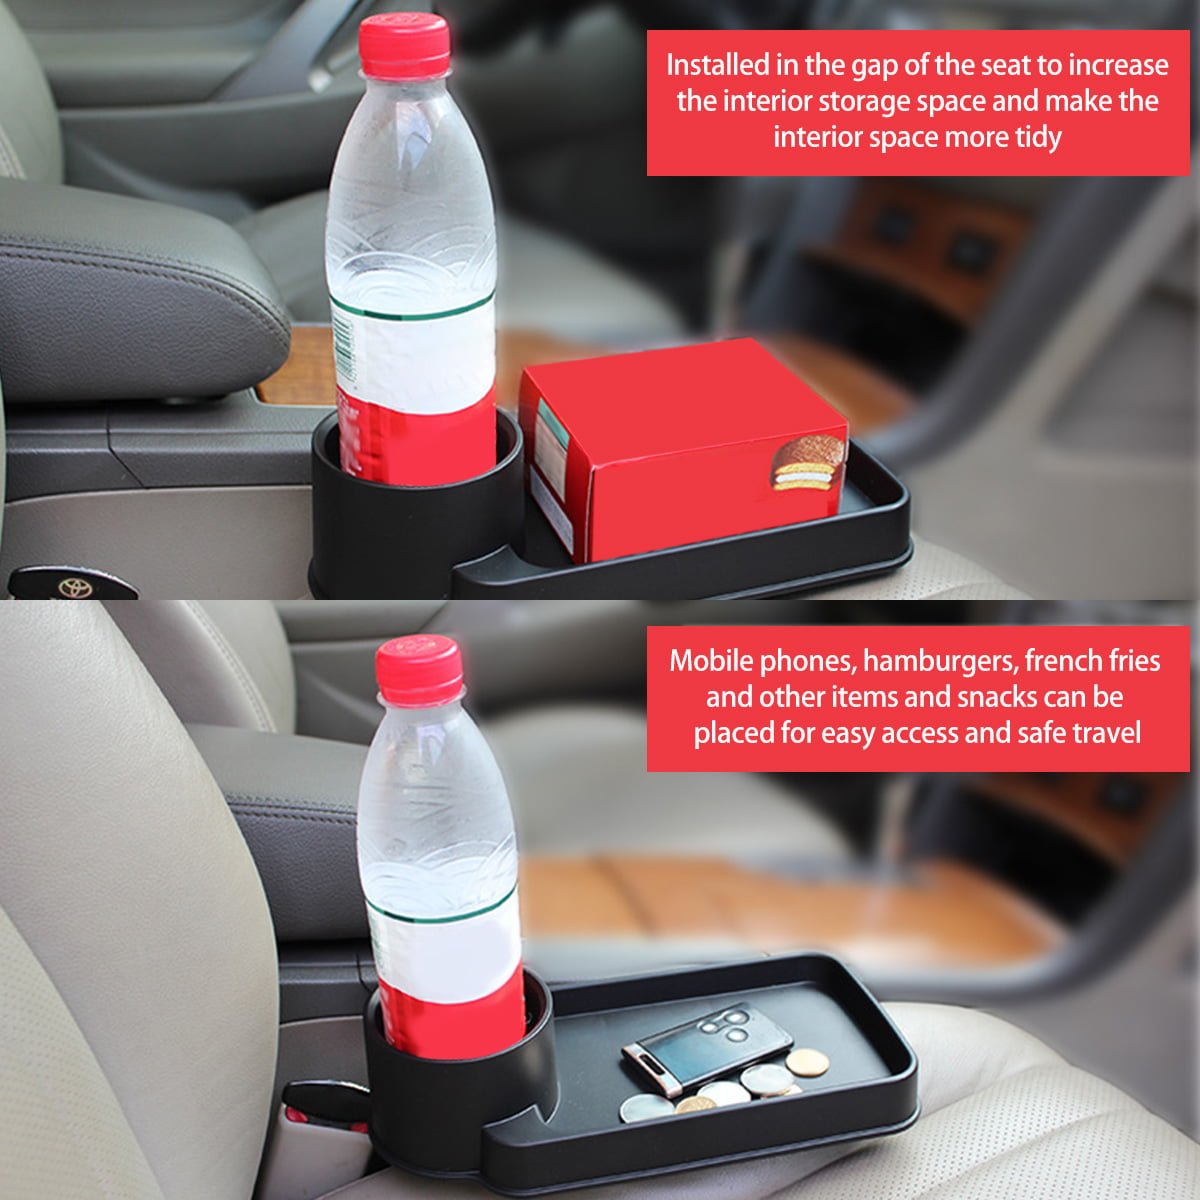 Hands DIY Car Drink Holder Car Seat Seam Wedge Cup Holder Universal Extra Cup  Holder Tray Multifunctional Seat Seam Gap Wedge Storage Organizer Drink  Holder for 2.7 Bottle Cup Food Phone 